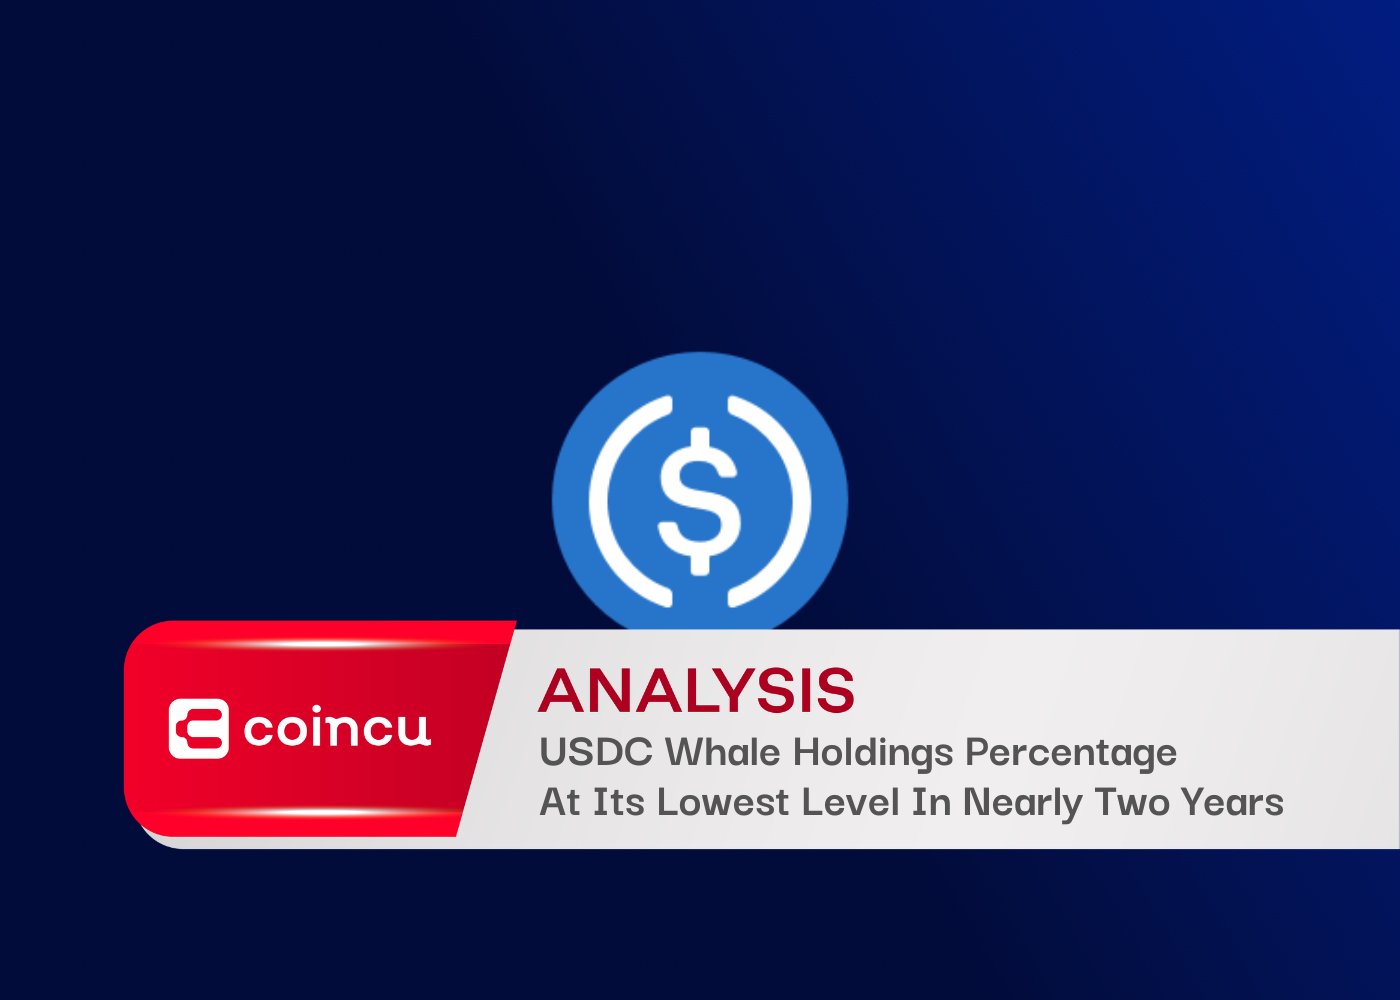 USDC Whale Holdings Percentage